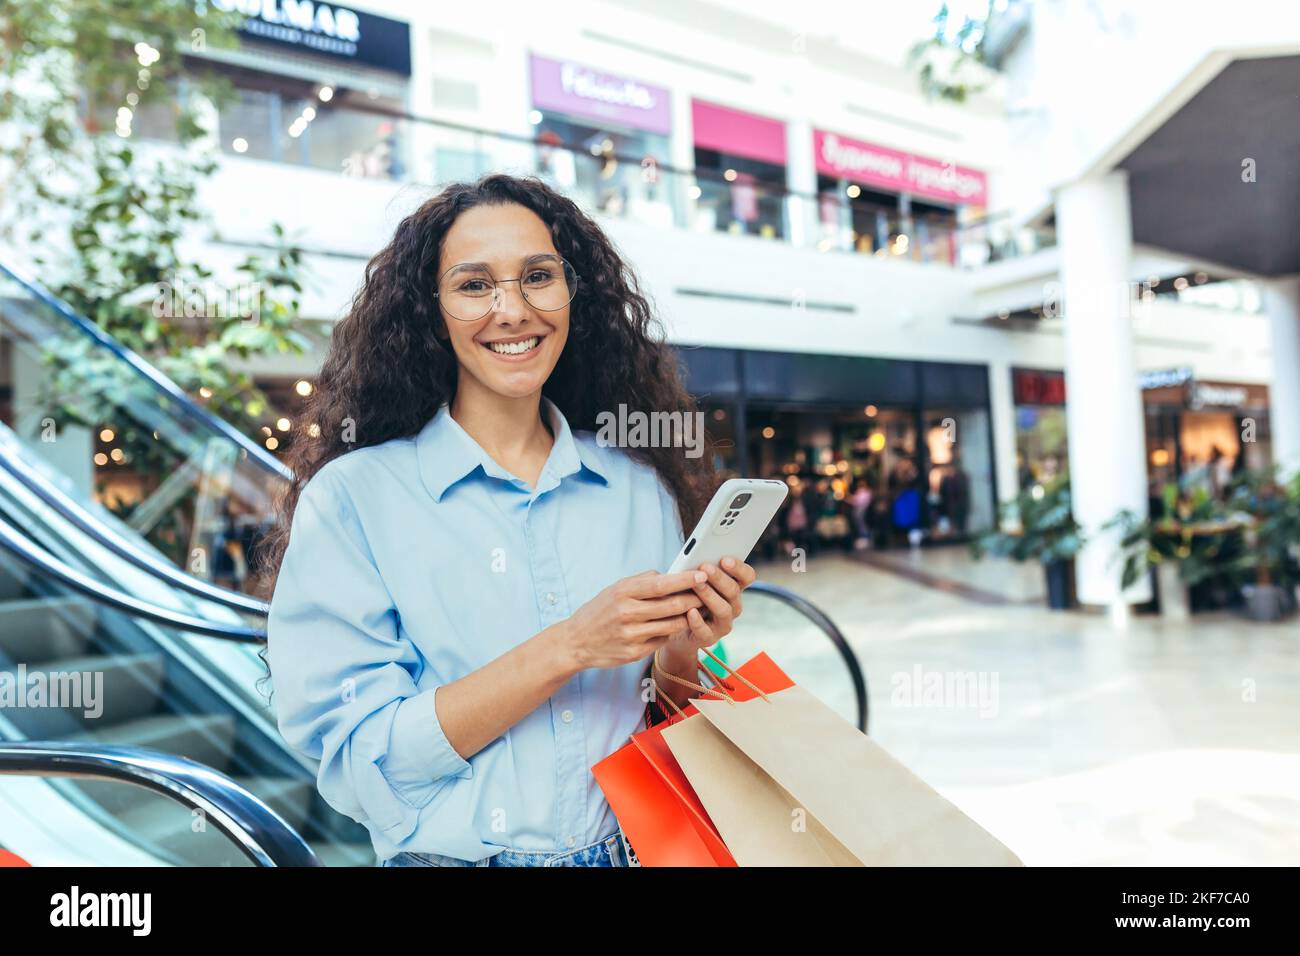 Business shopping. A young beautiful Latin American woman, a businesswoman stands in a shopping center near an escalator, holds a phone and paper bags with goods in her hands, makes purchases, smiles. Stock Photo